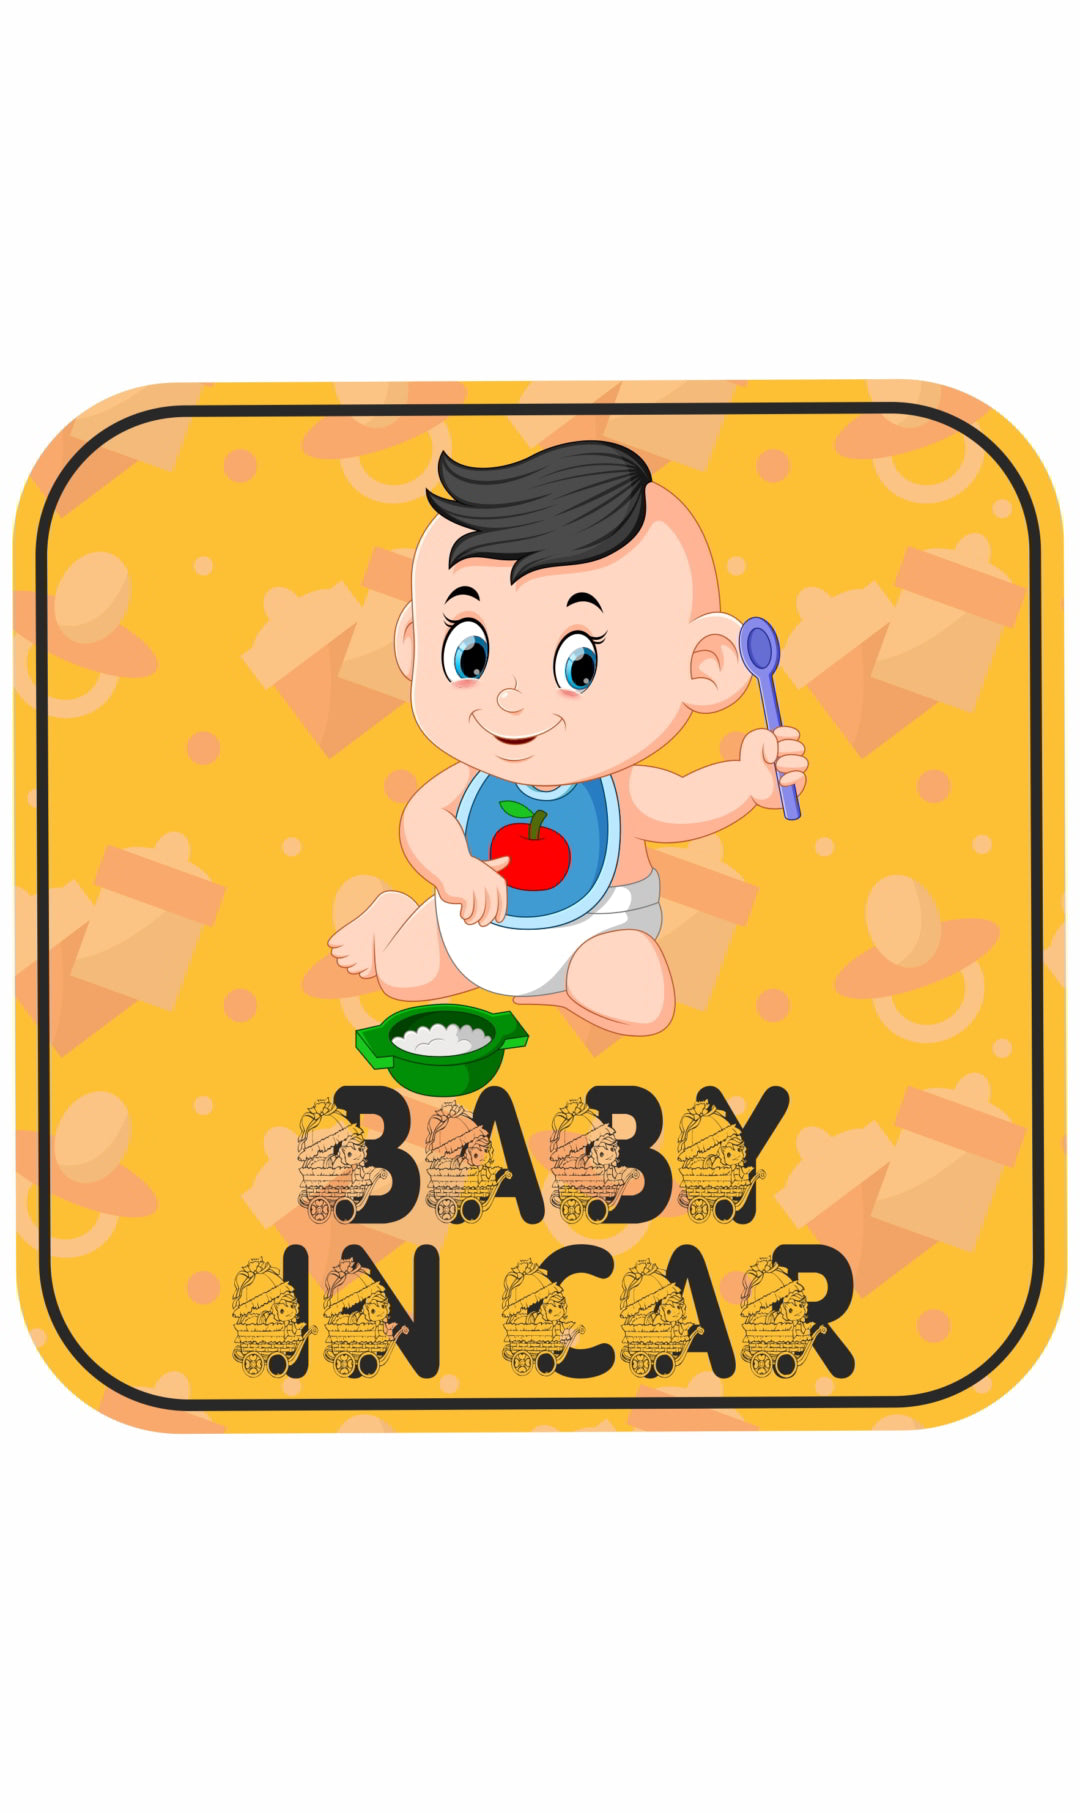 BABY IN CAR Decal Sticker(2pc)_c23